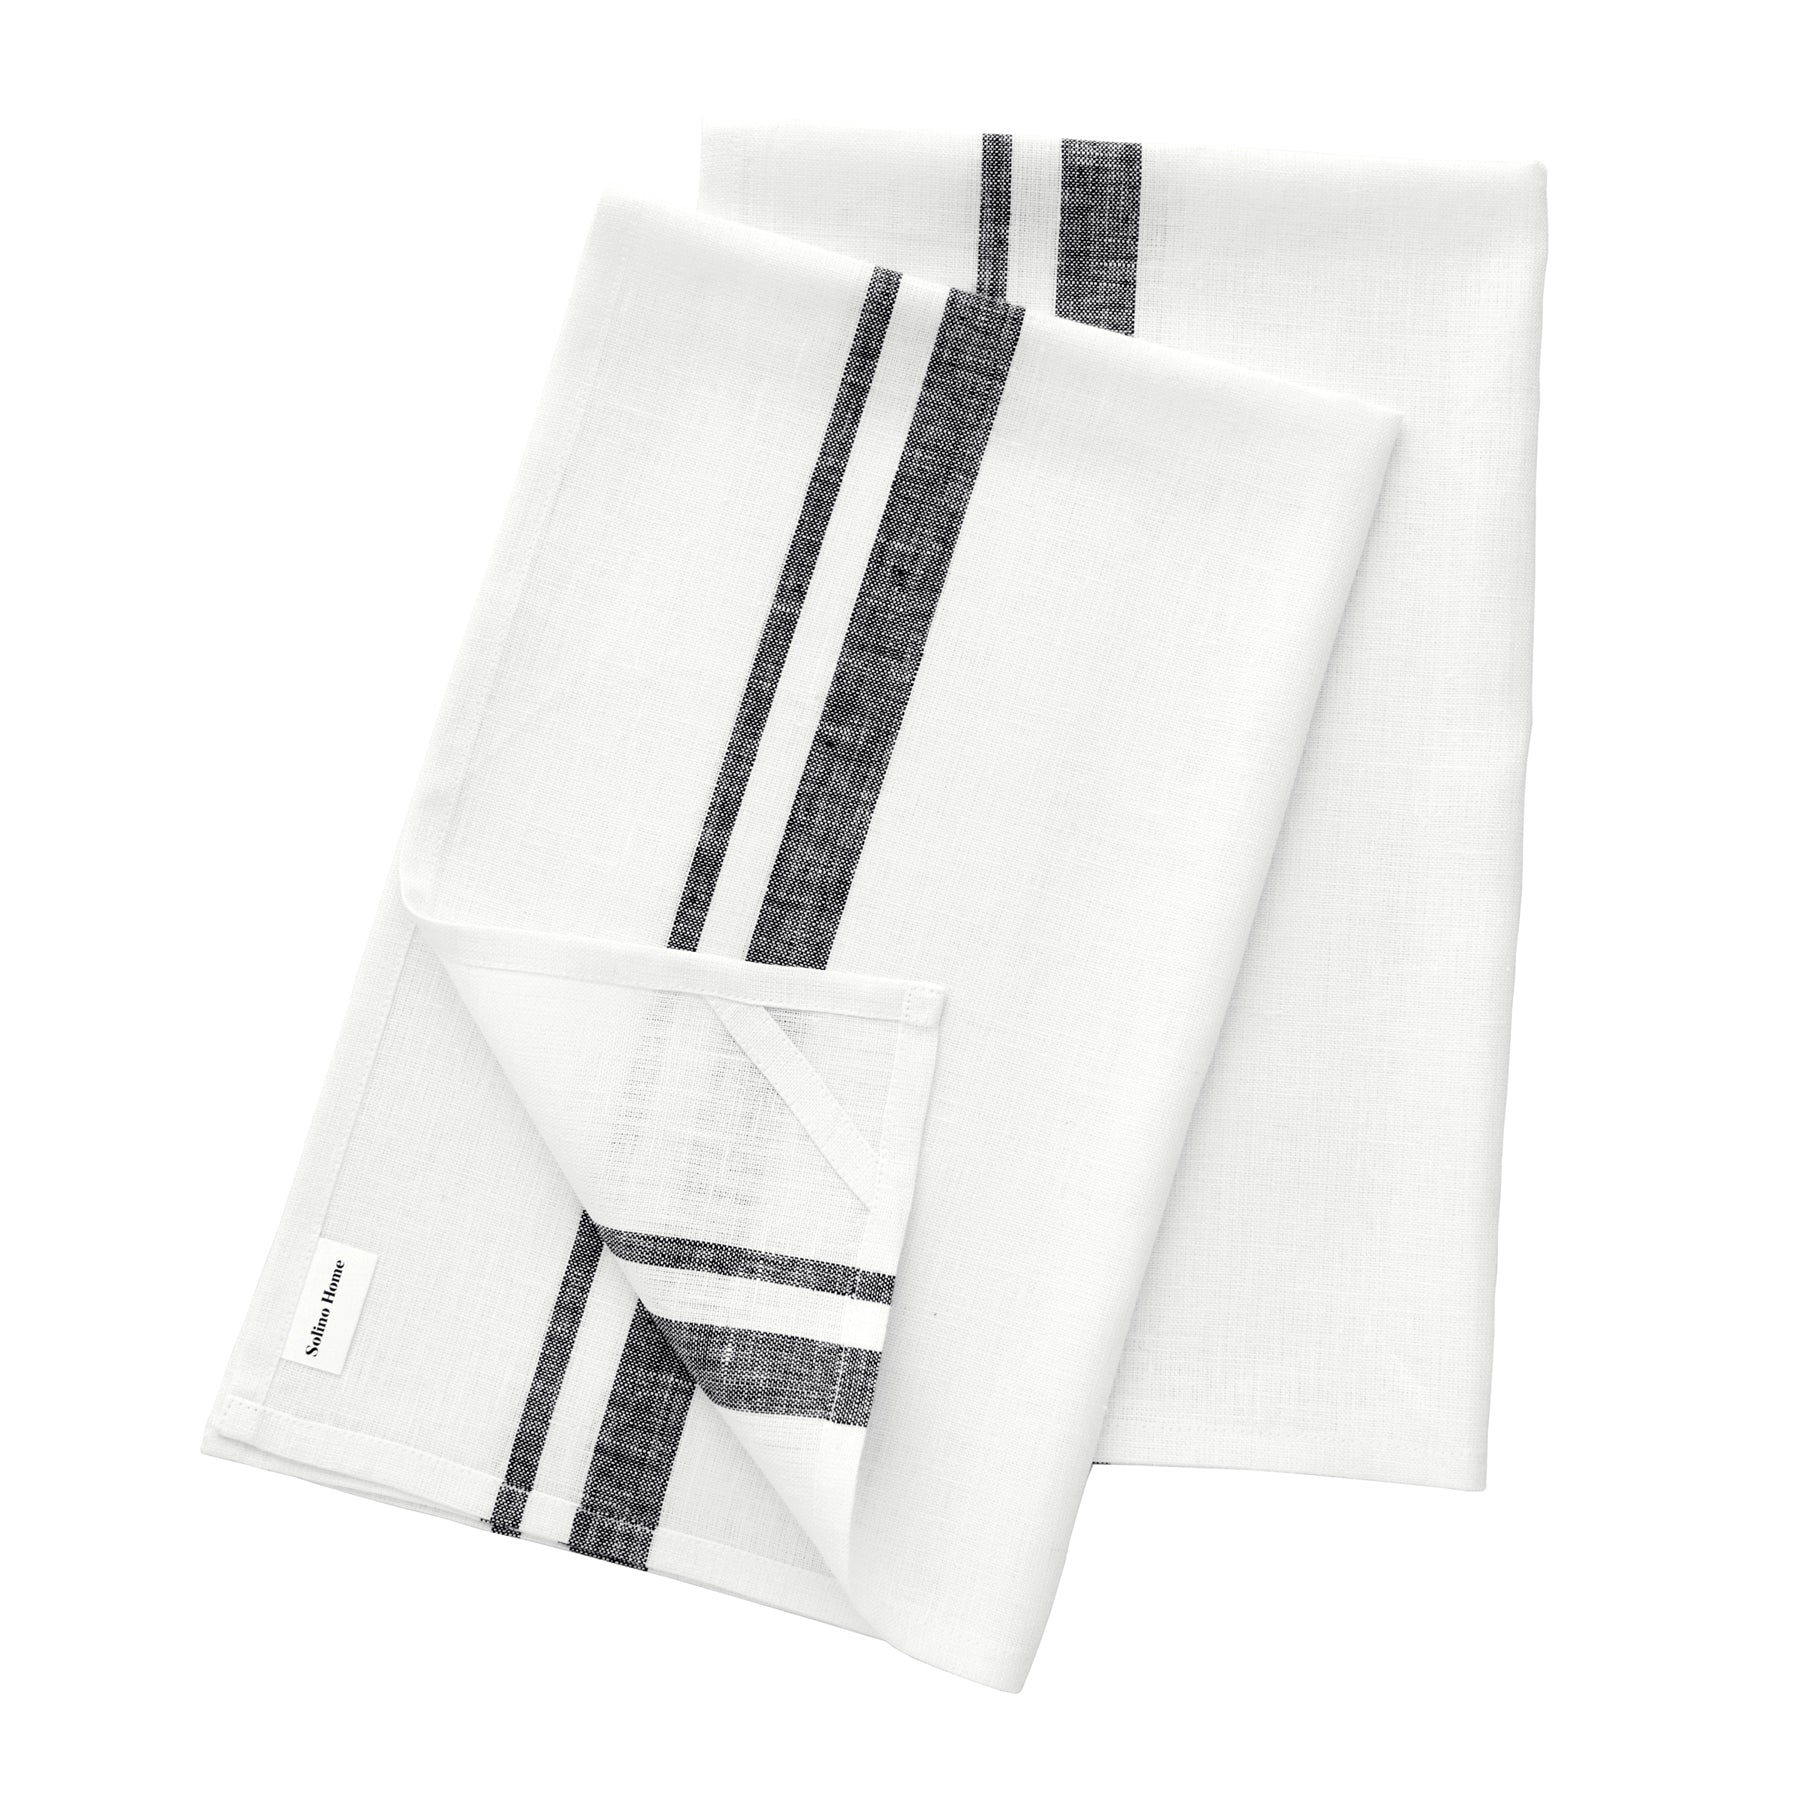 Solino Home Farmhouse Style Kitchen Towel (Assorted)